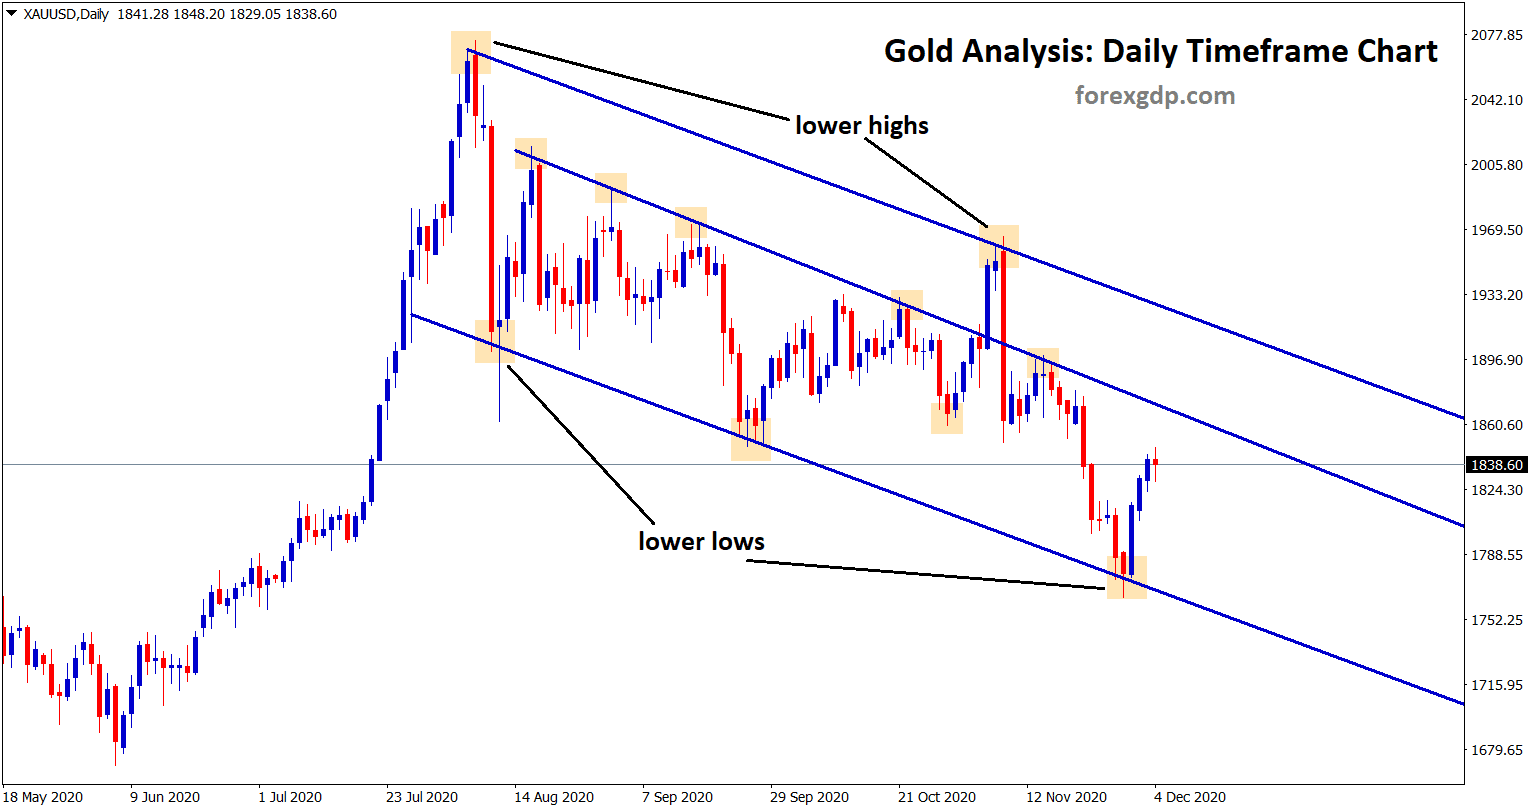 Gold downtrend price analysis after US Election